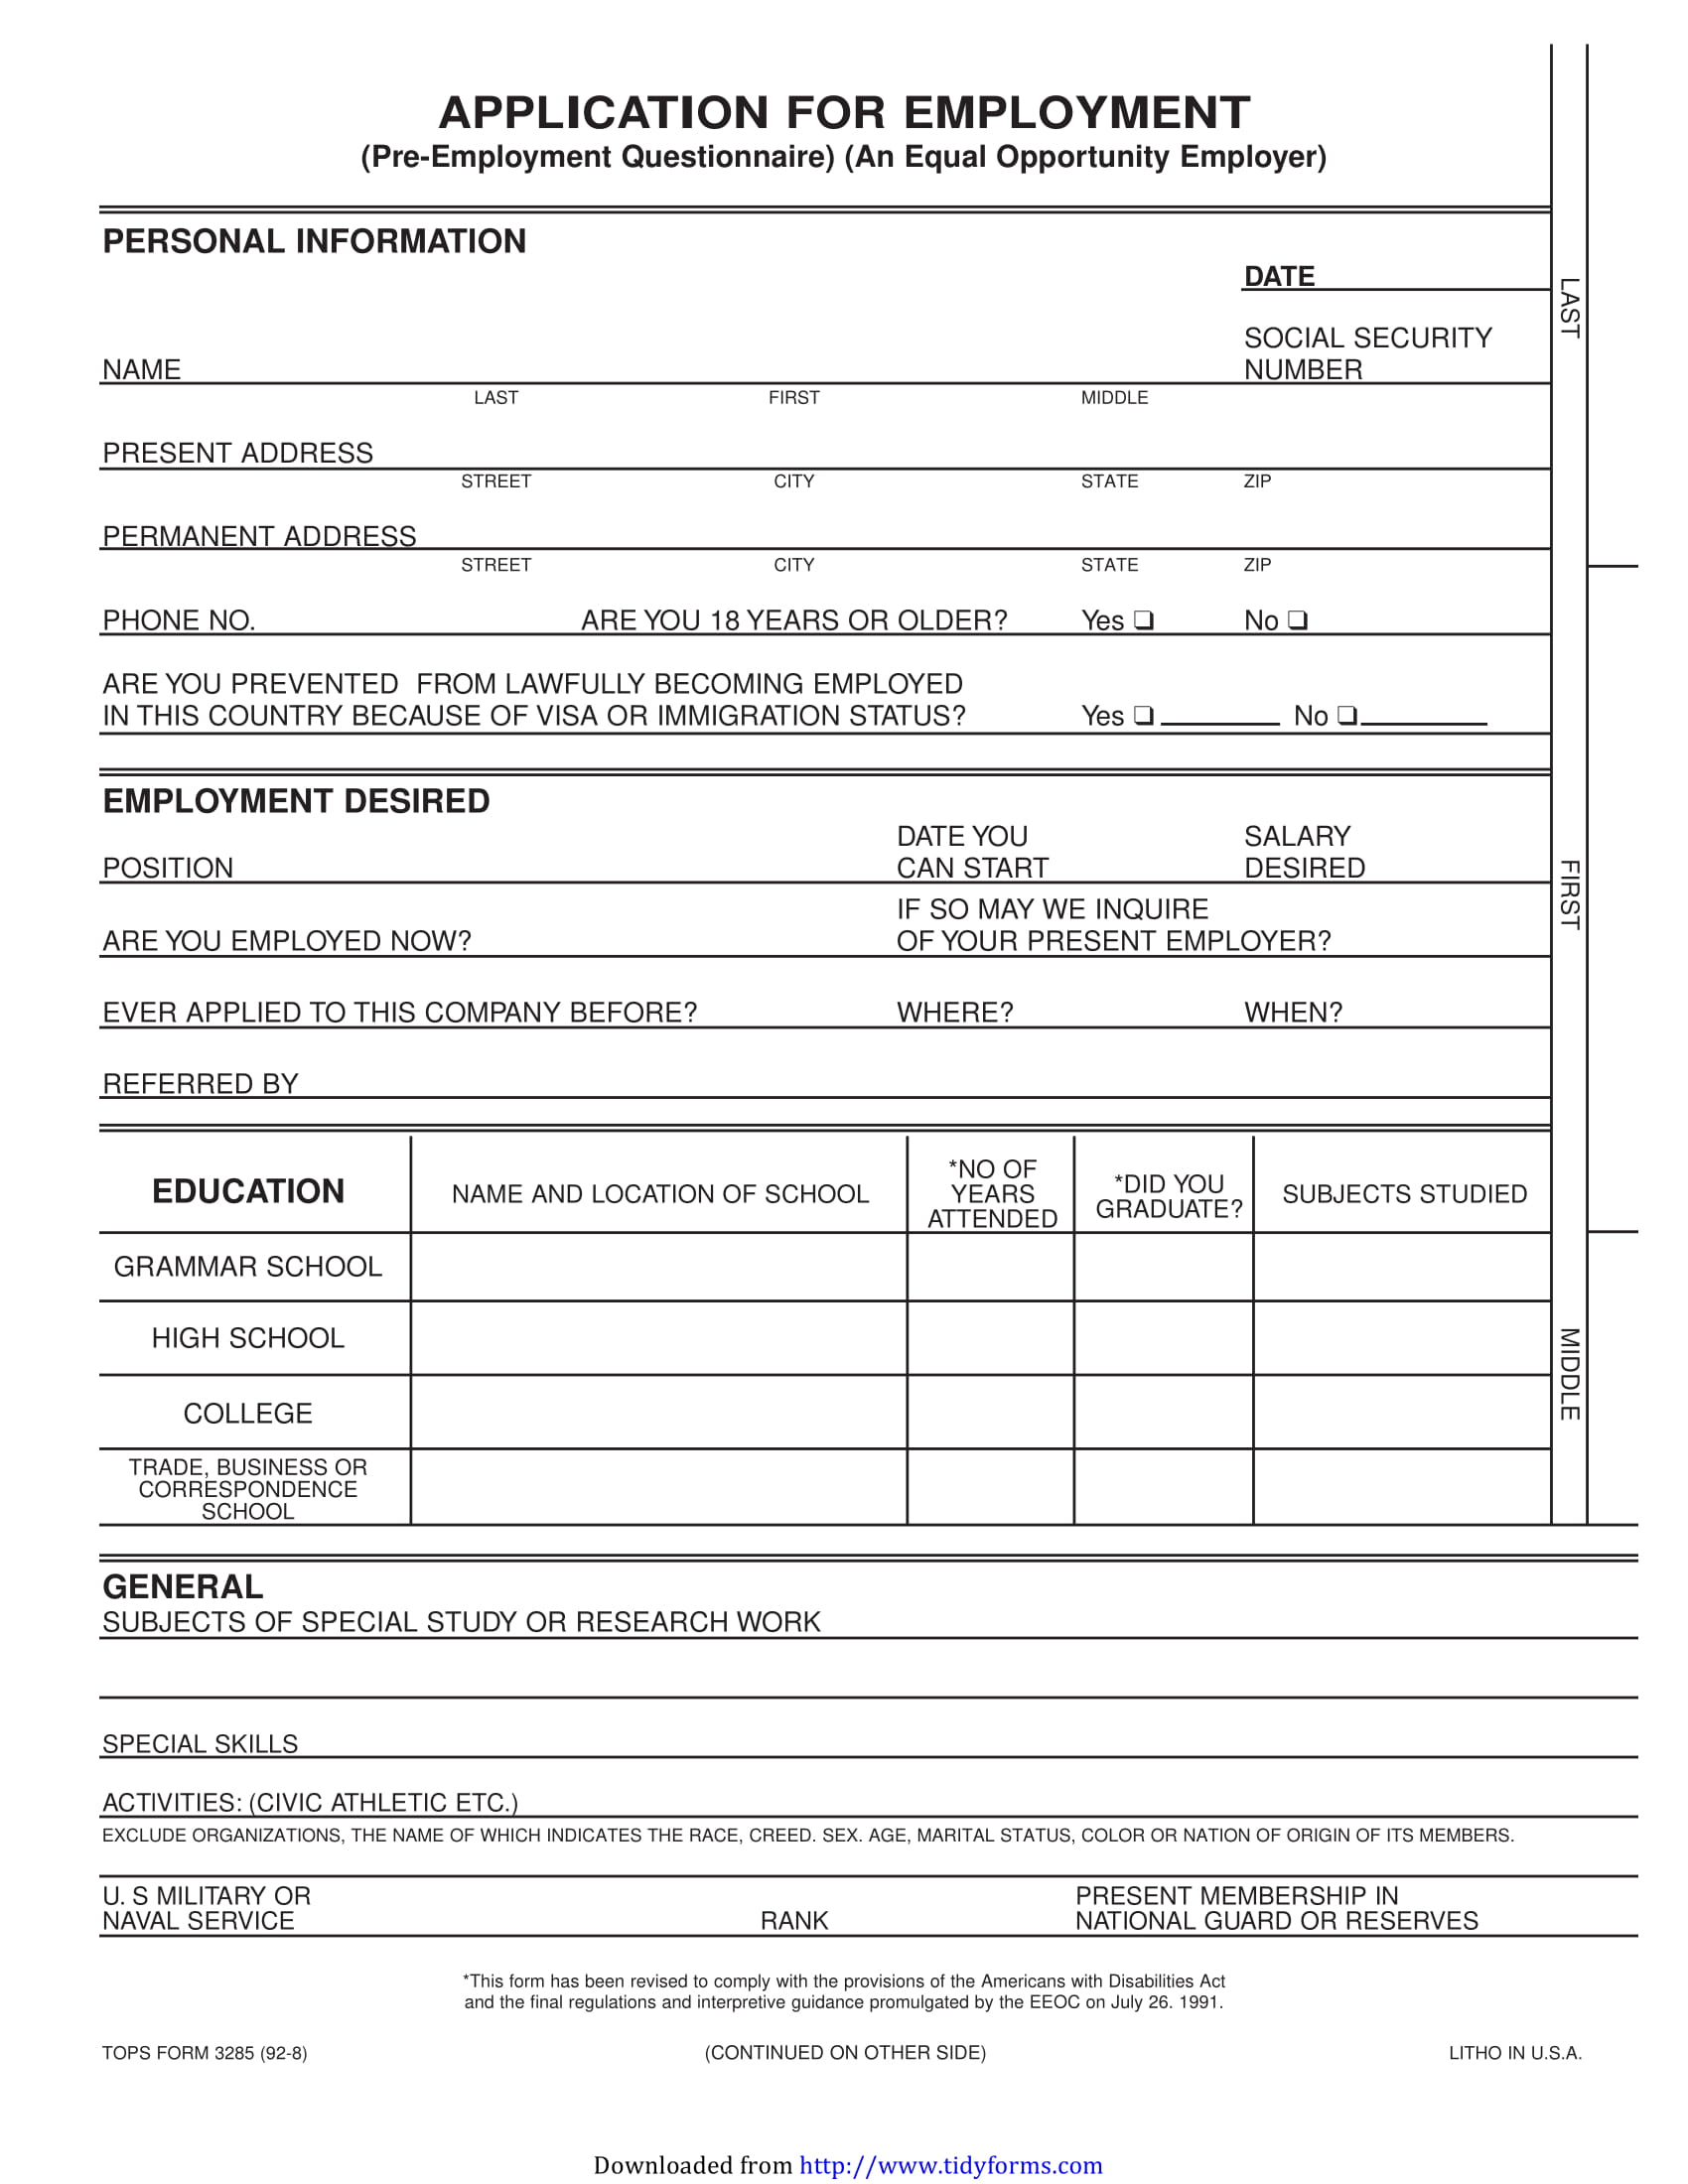 pre employment application form example